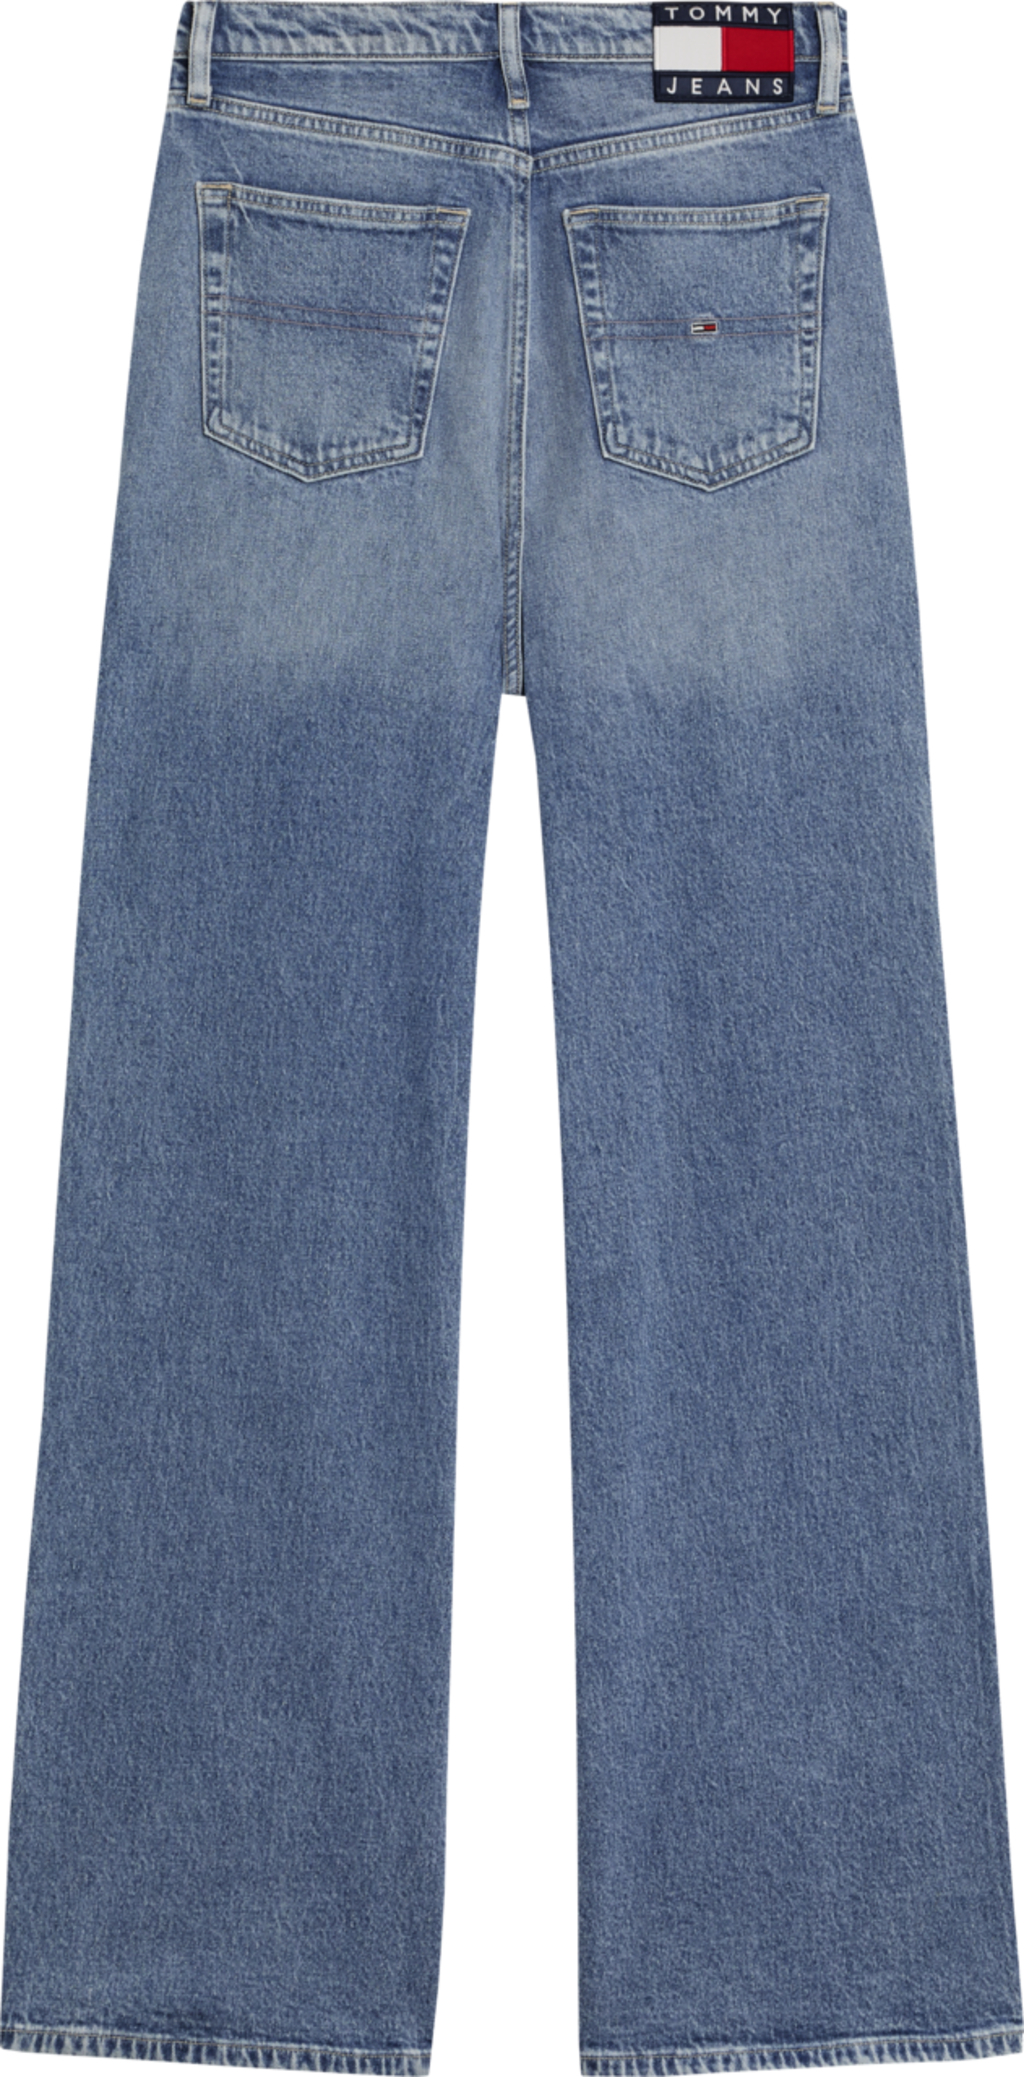 TOMMY H. CLAIRE RISE - JEANS